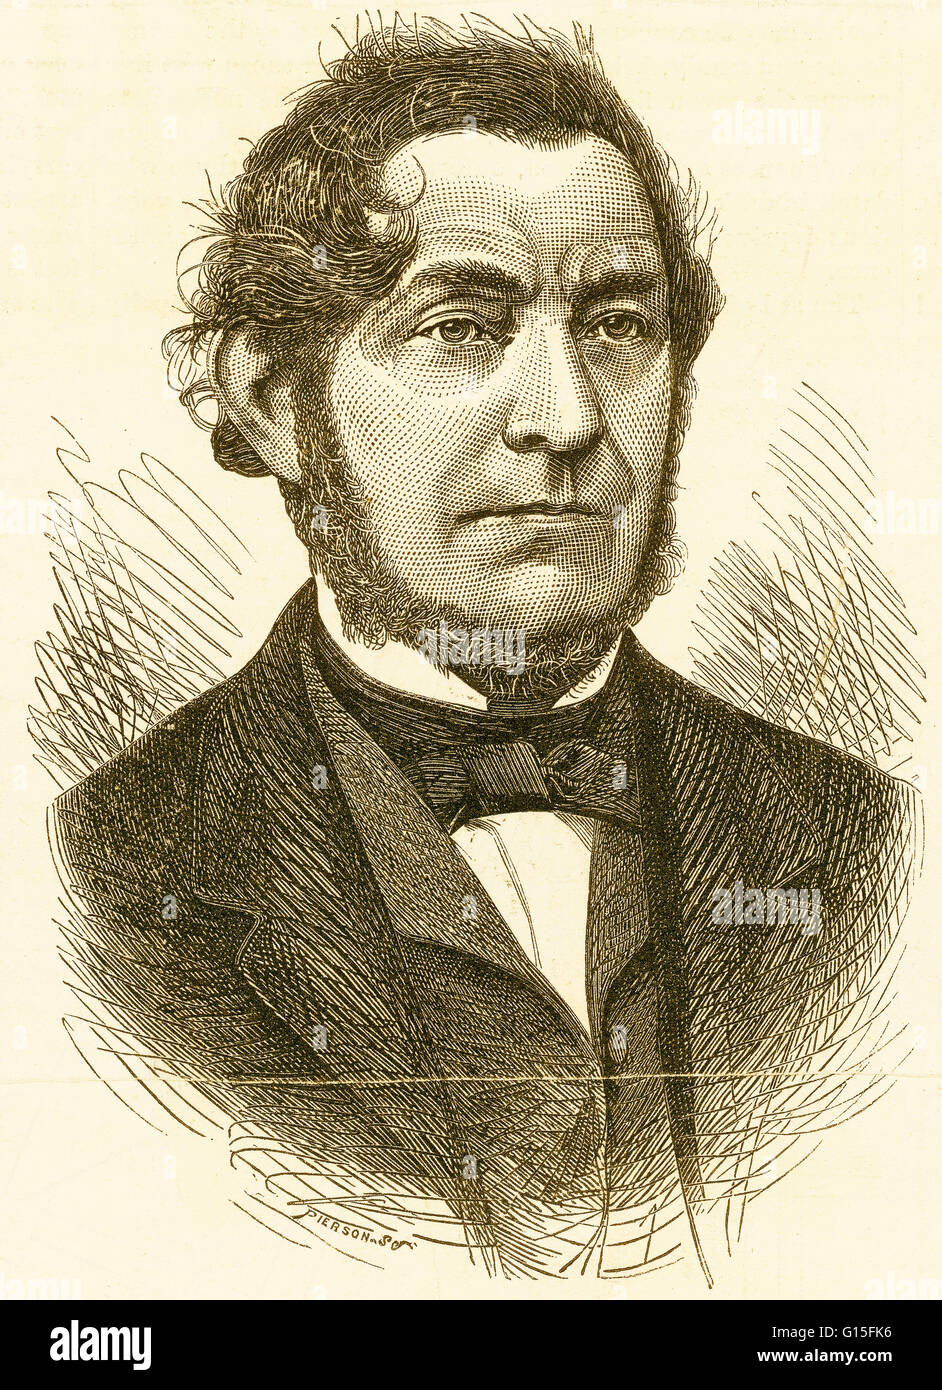 An illustration of Robert Bunsen (March 31, 1811 - August 16, 1899), the German chemist who perfected the burner that was invented by Michael Faraday and worked on emission spectroscopy of heated elements. He discovered the elements cesium and rubidium wi Stock Photo